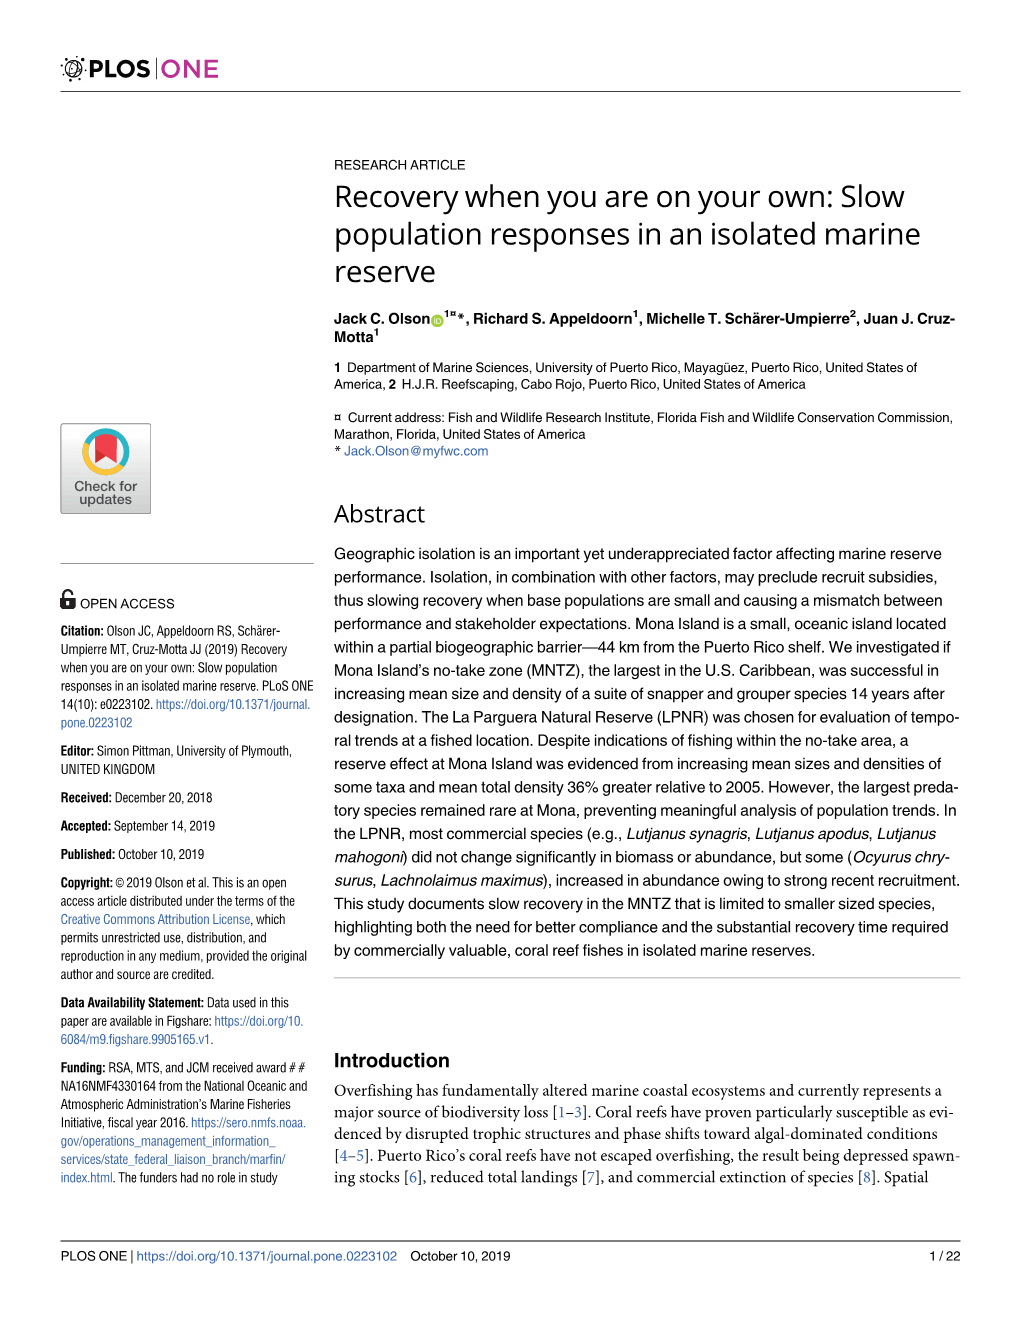 Recovery When You Are on Your Own: Slow Population Responses in an Isolated Marine Reserve